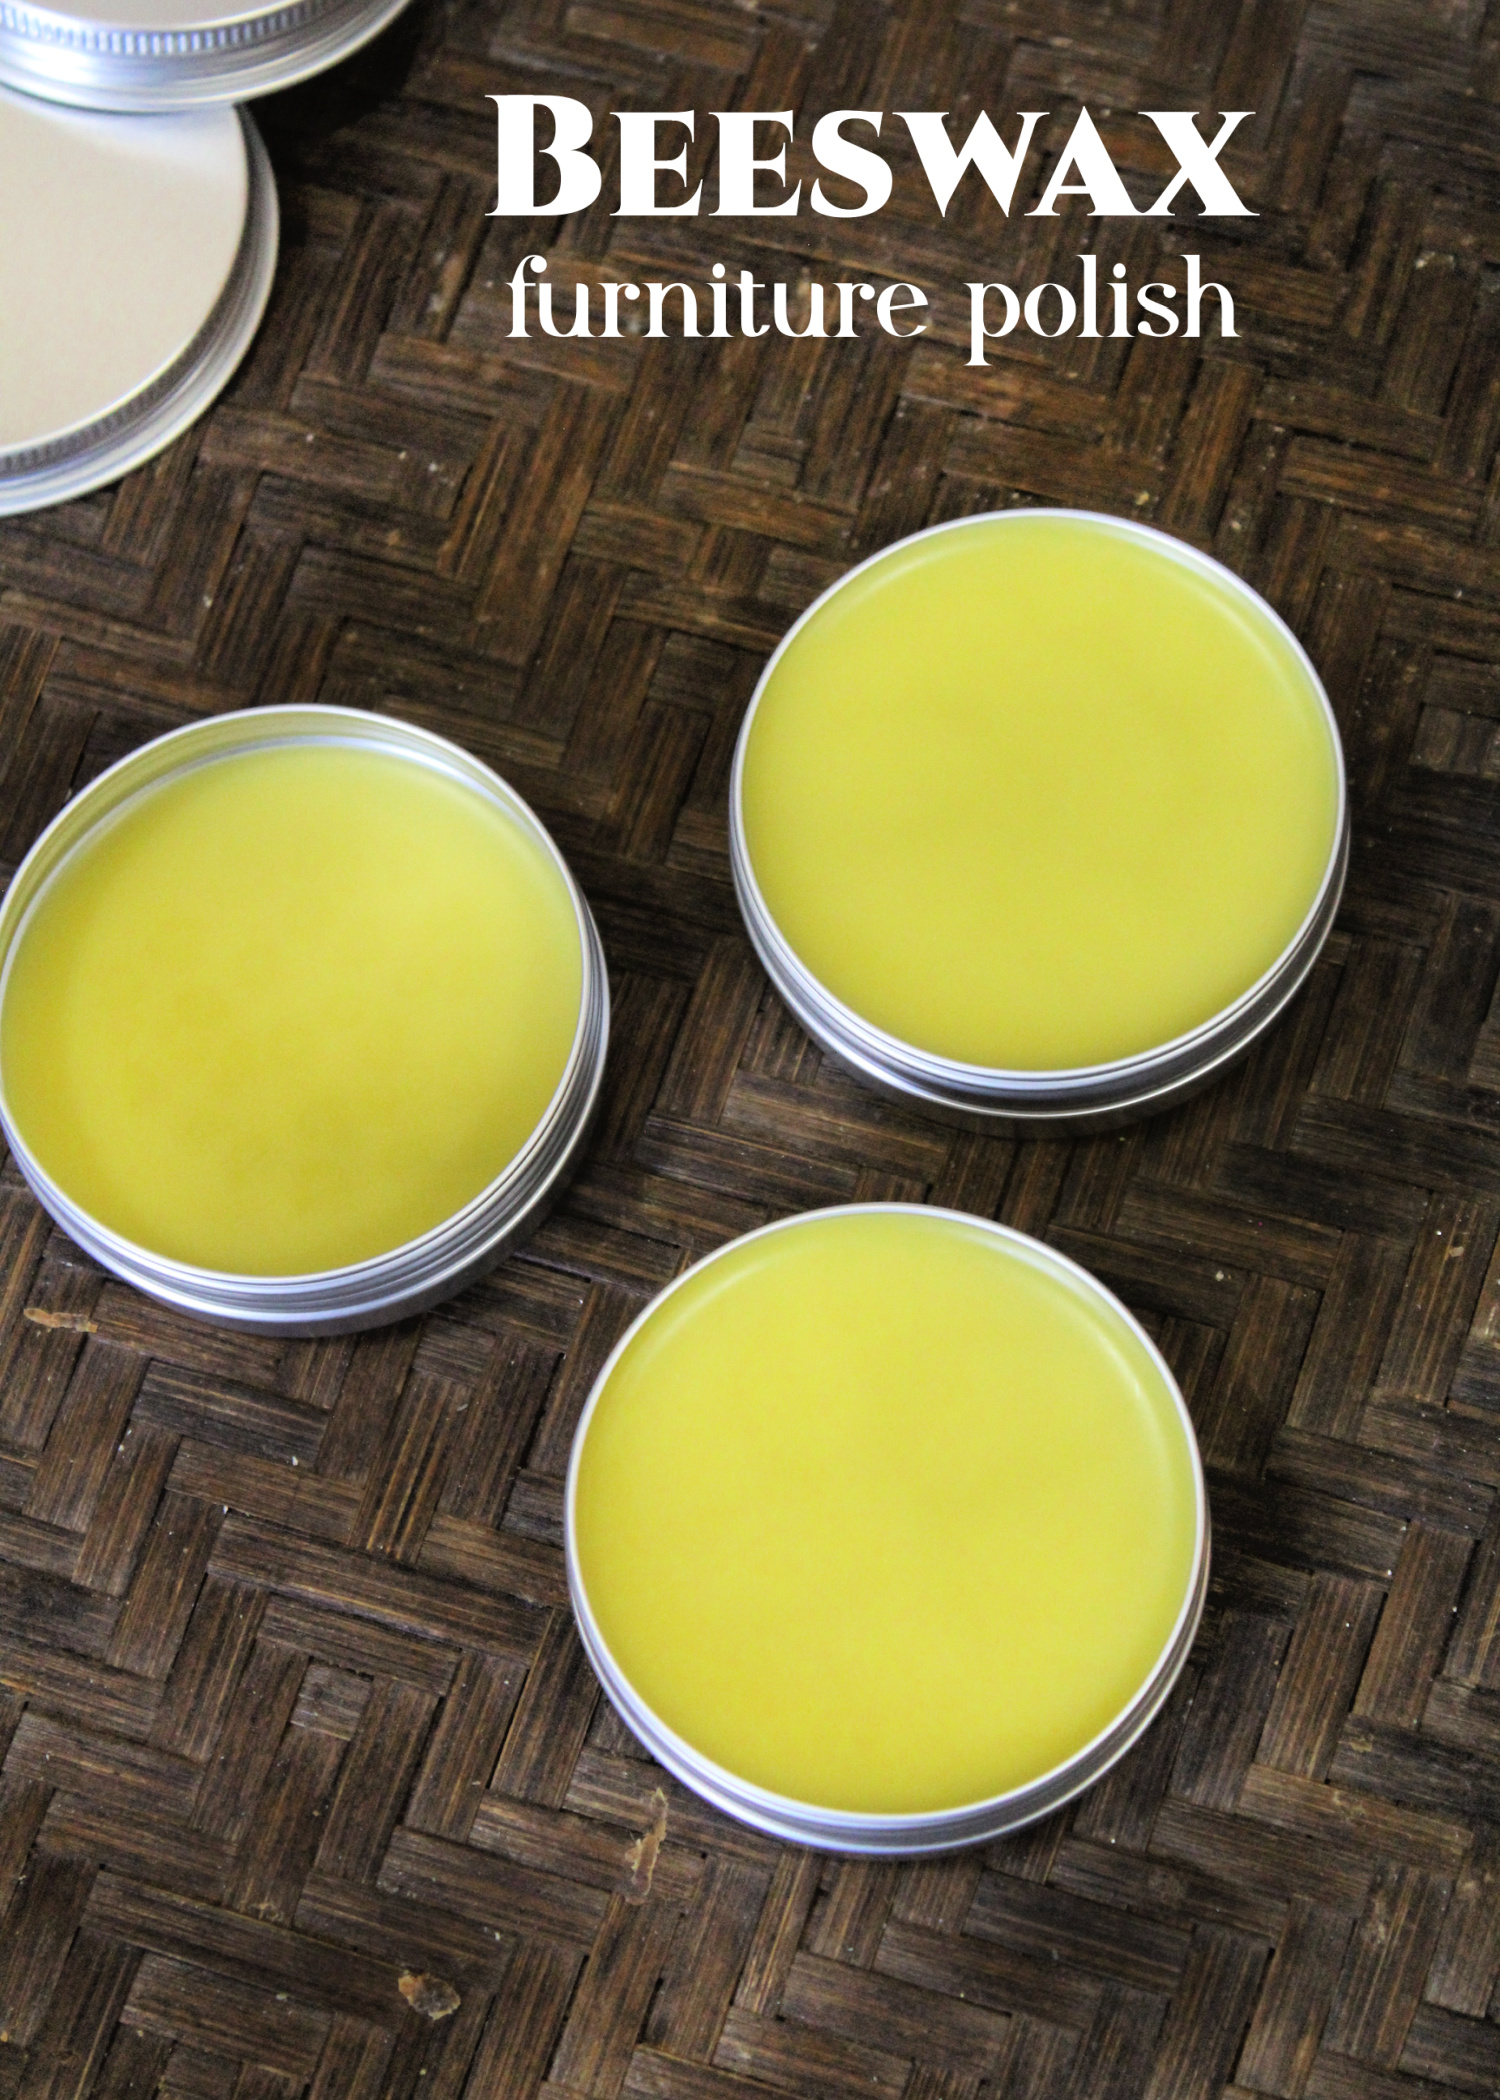 Bring some life to your wood furniture with this DIY Beeswax Furniture Polish you can make easily at home. This recipe is a simple way to care for your beautiful furniture without chemical ingredients!